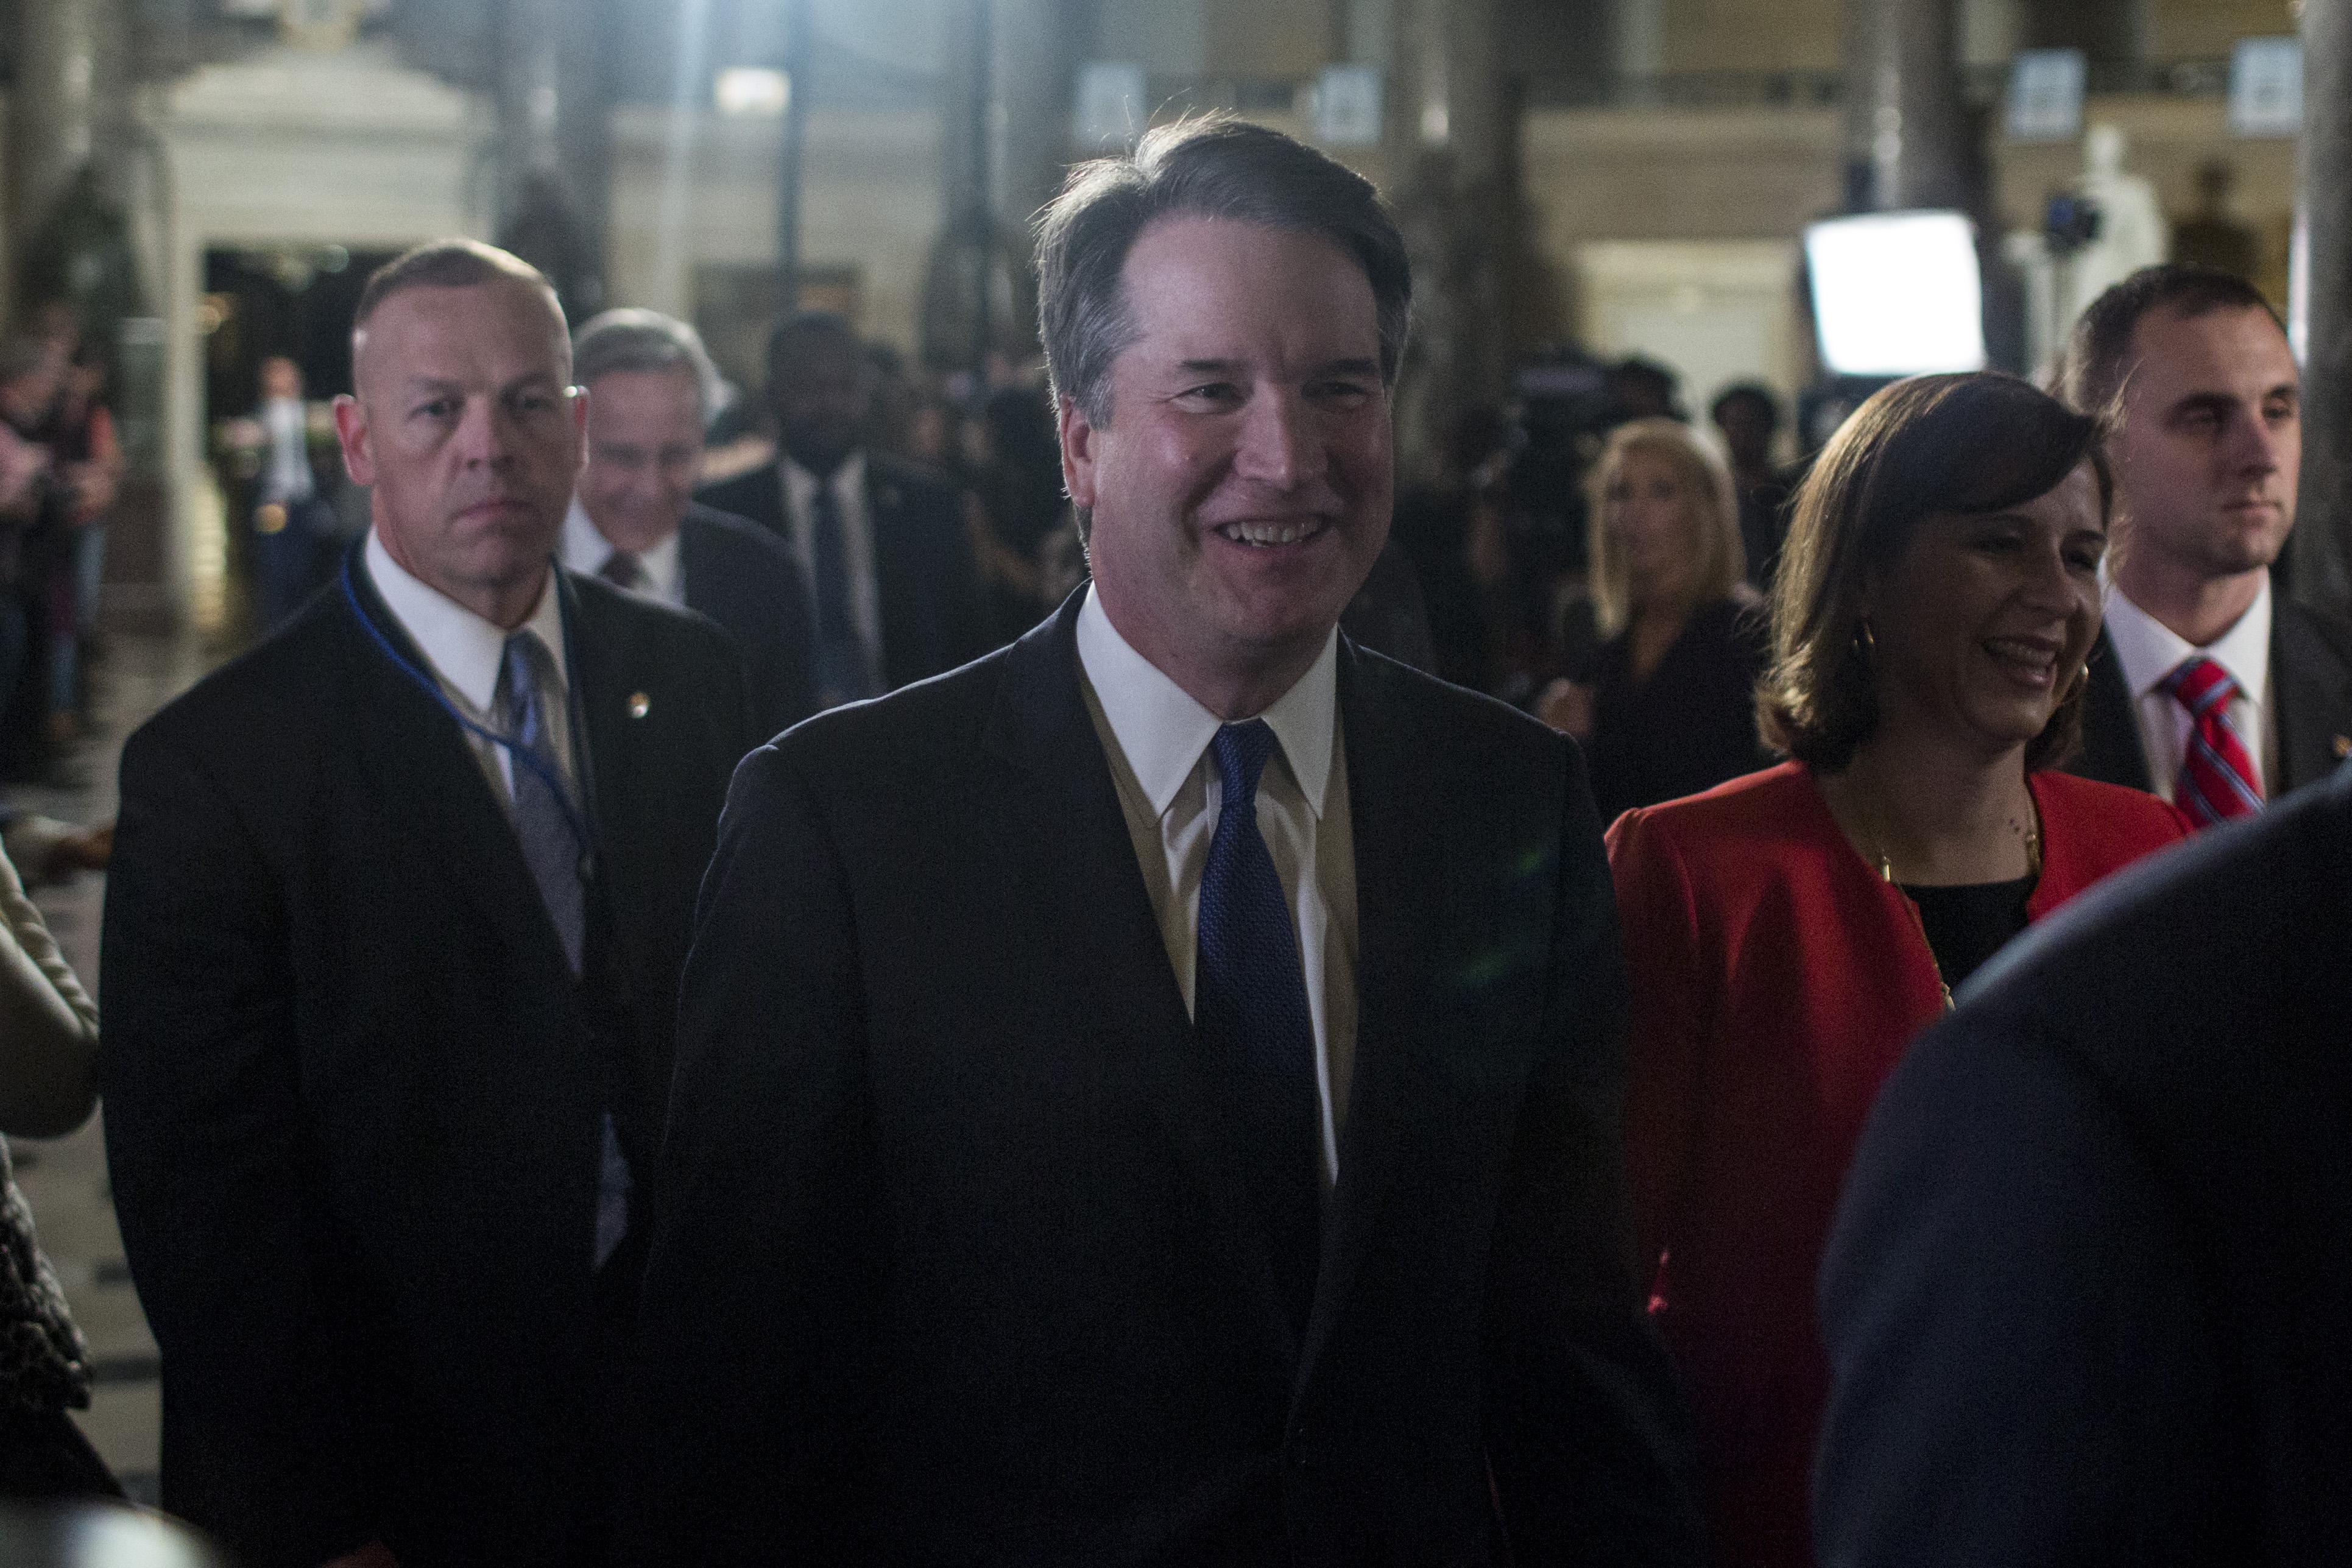 Kavanaugh smiling as he and others file into the House chamber.